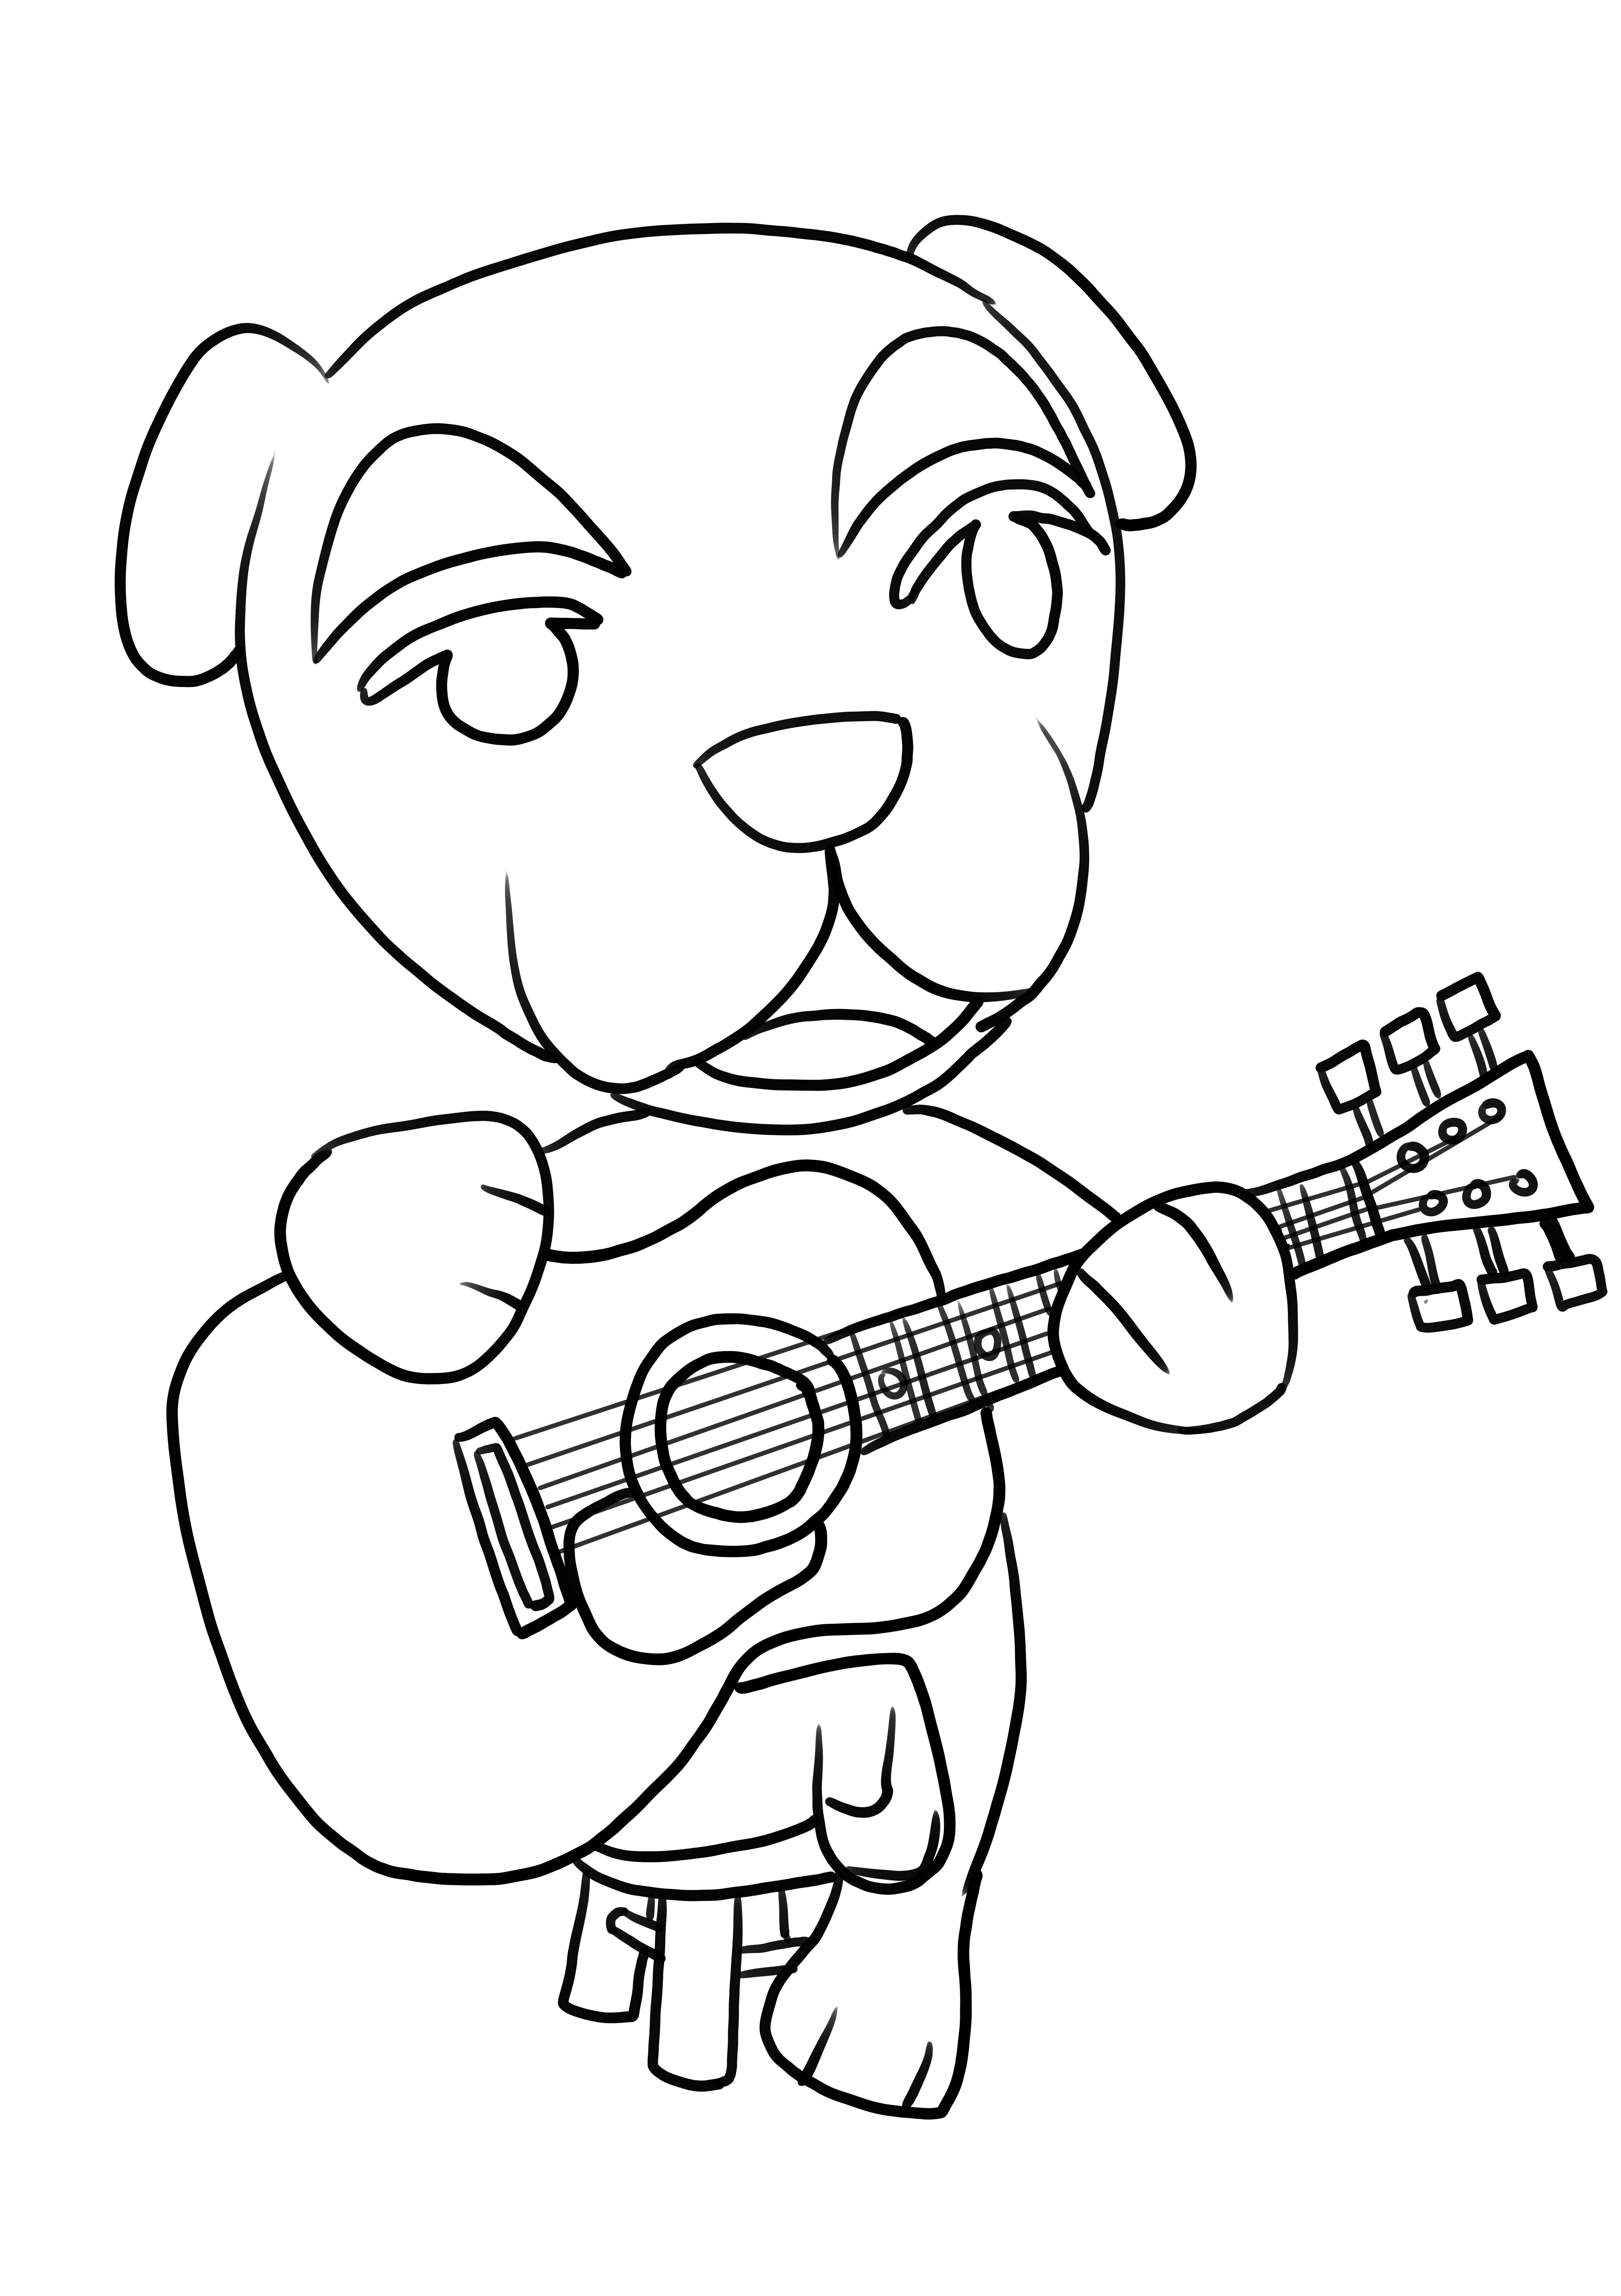 K. K. Slider from Animal Crossing coloring page